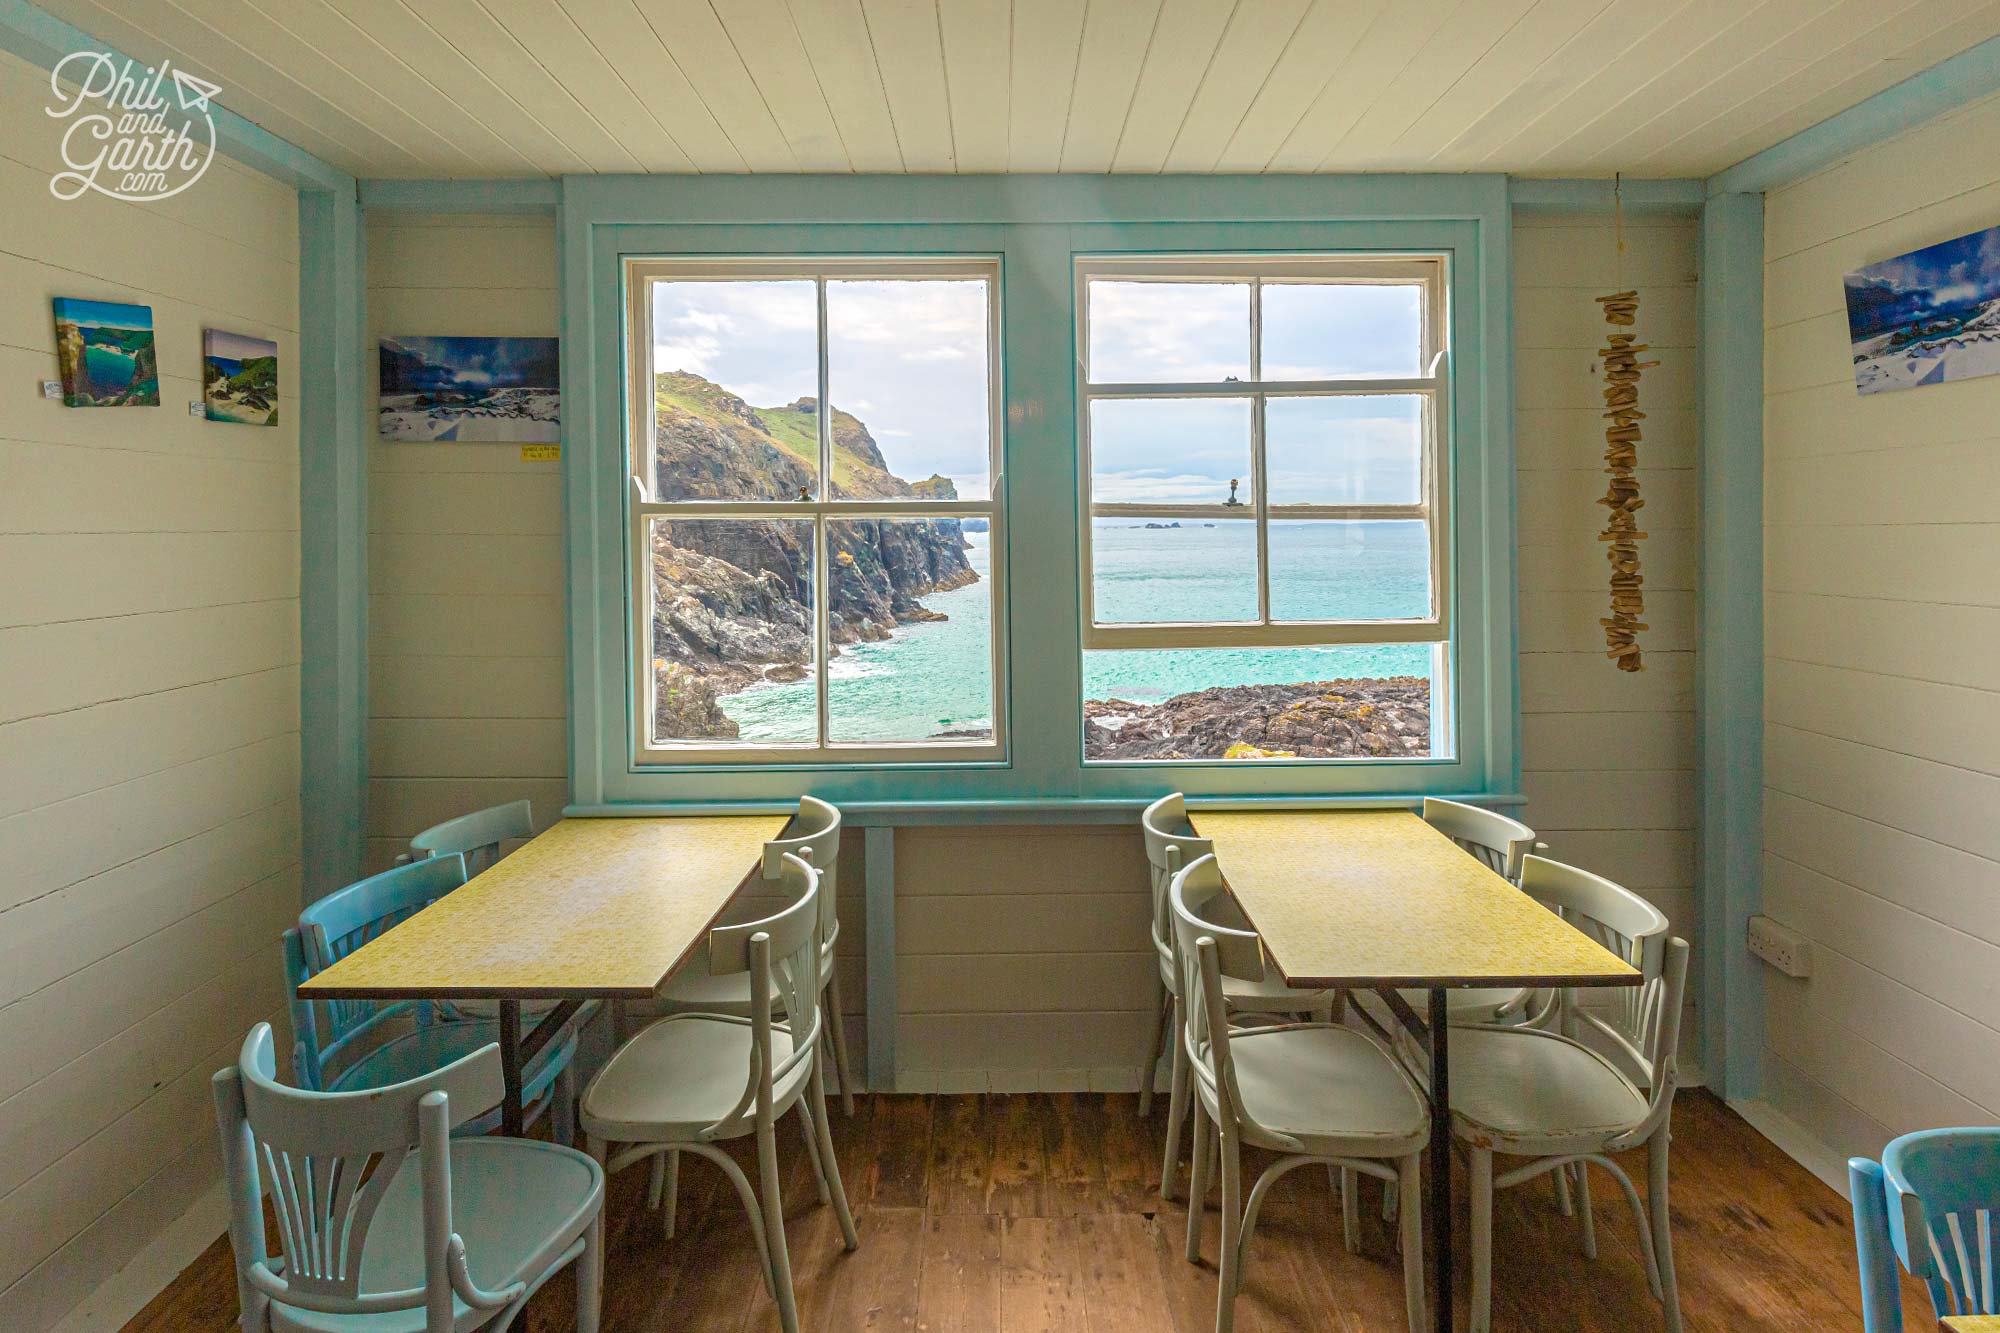 Wonderful view from inside the Kynance Cove Cafe